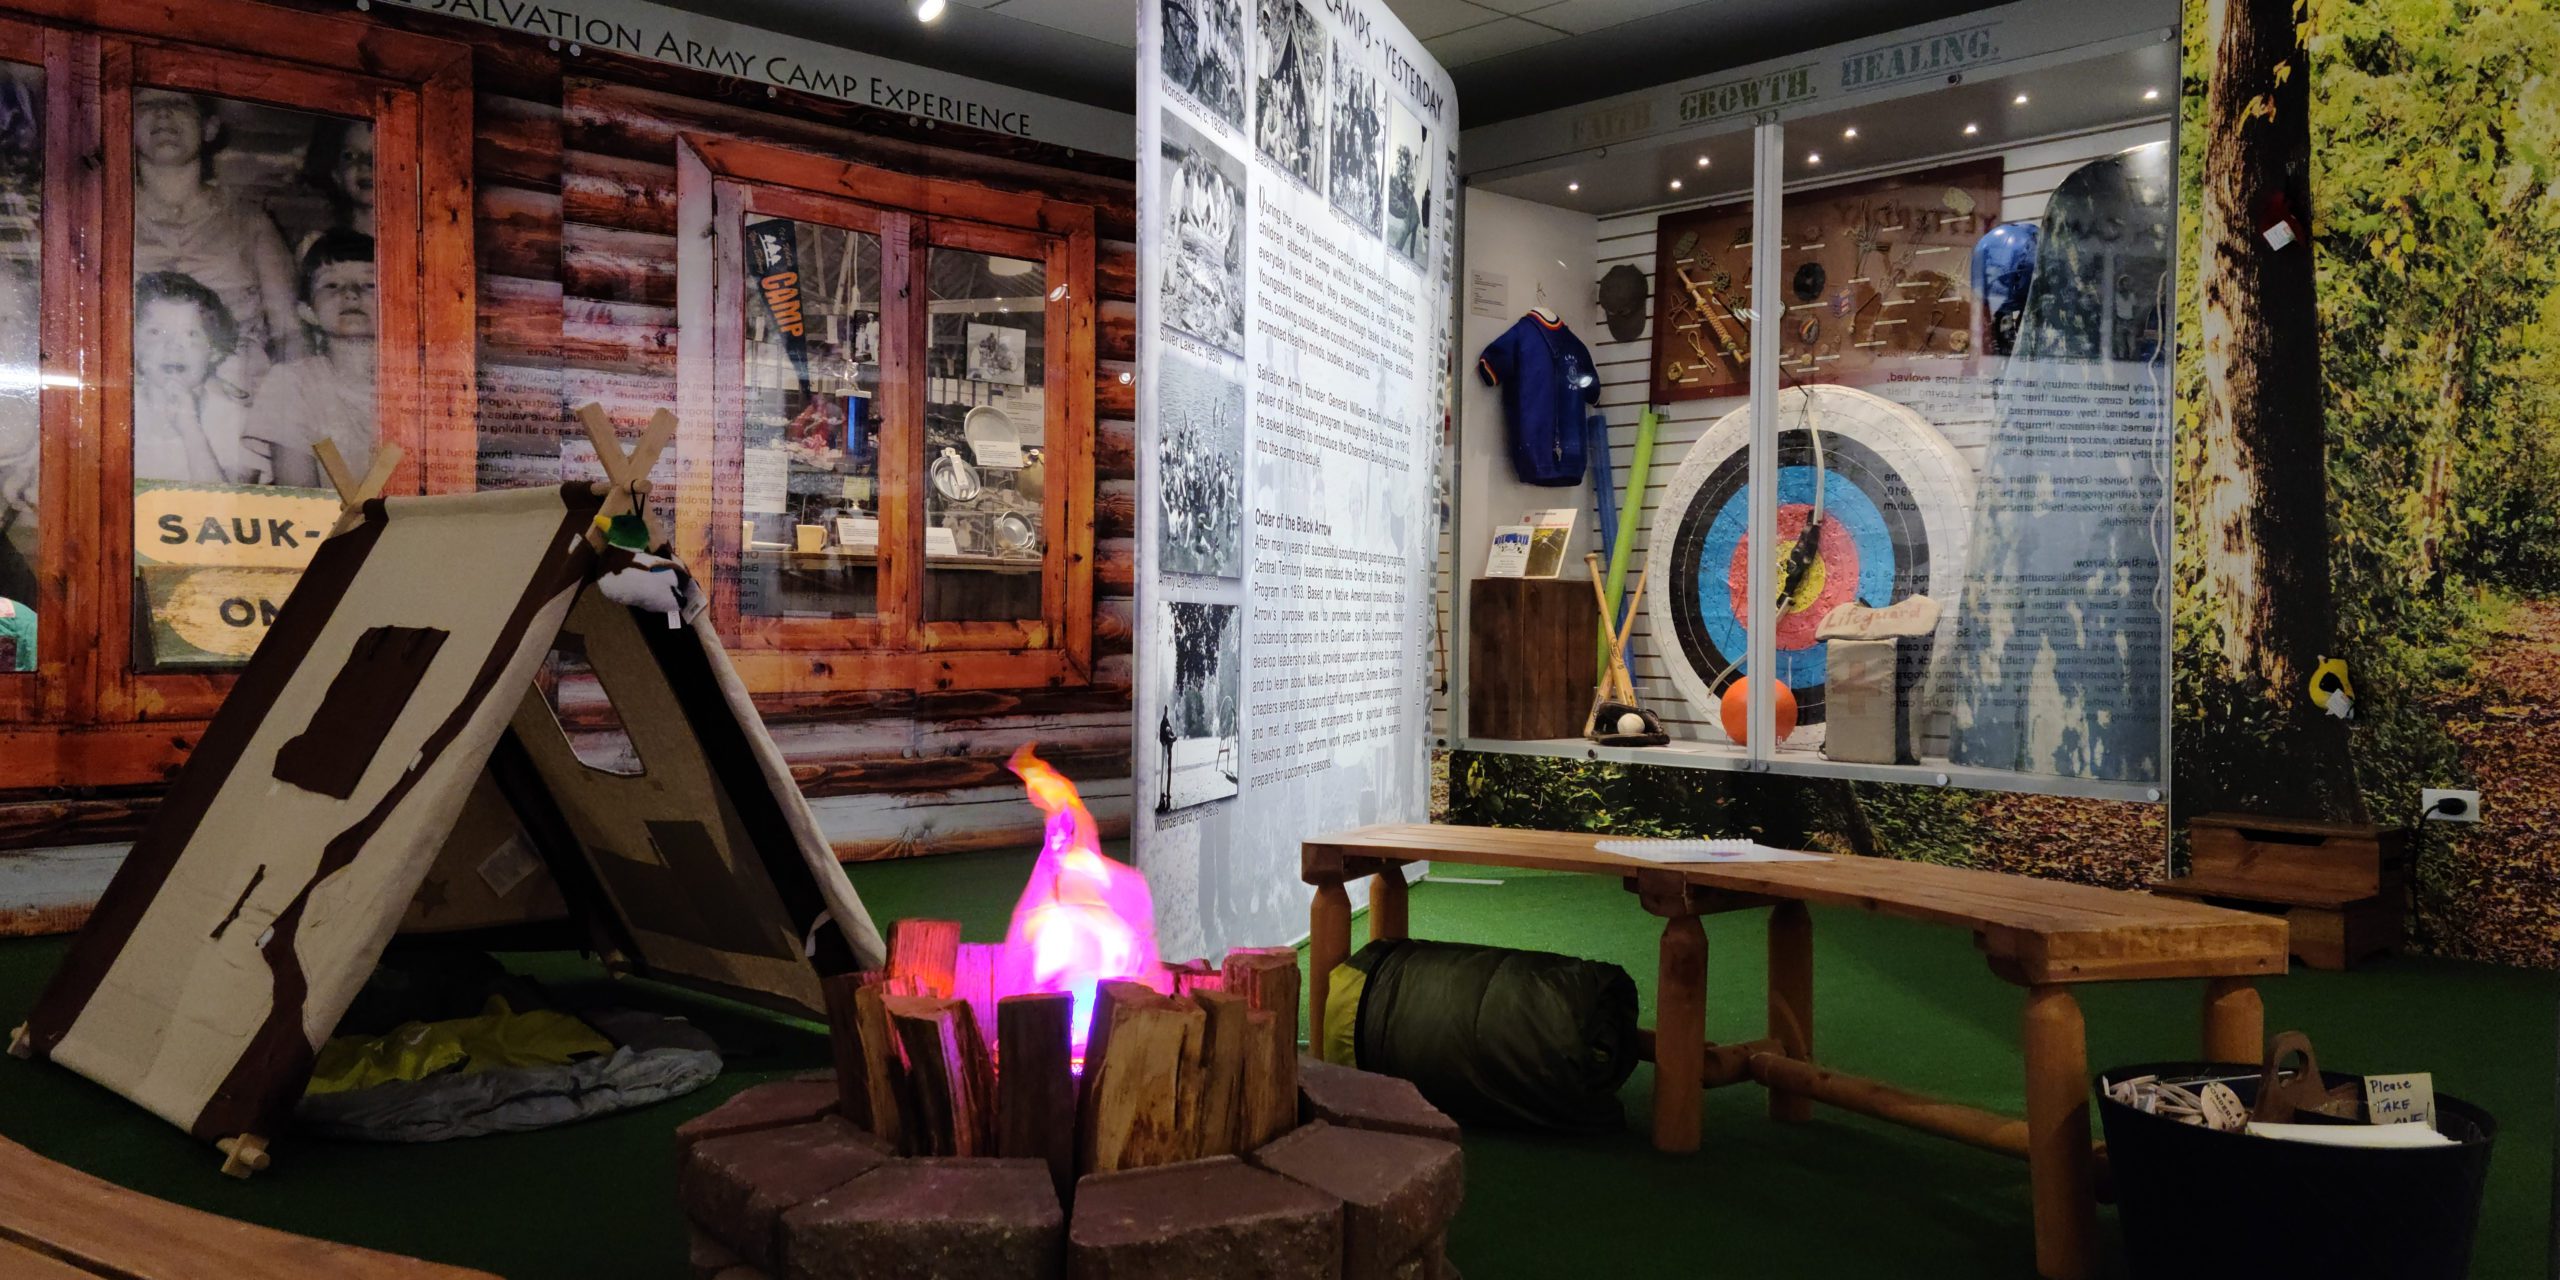 Photograph showing the interior of an exhibit gallery. Exhibit cases can be seen in the background with artifacts inside. One of the cases is decorated to look like a log camp cabin. In the foreground is a tent with artificial fire and bench.